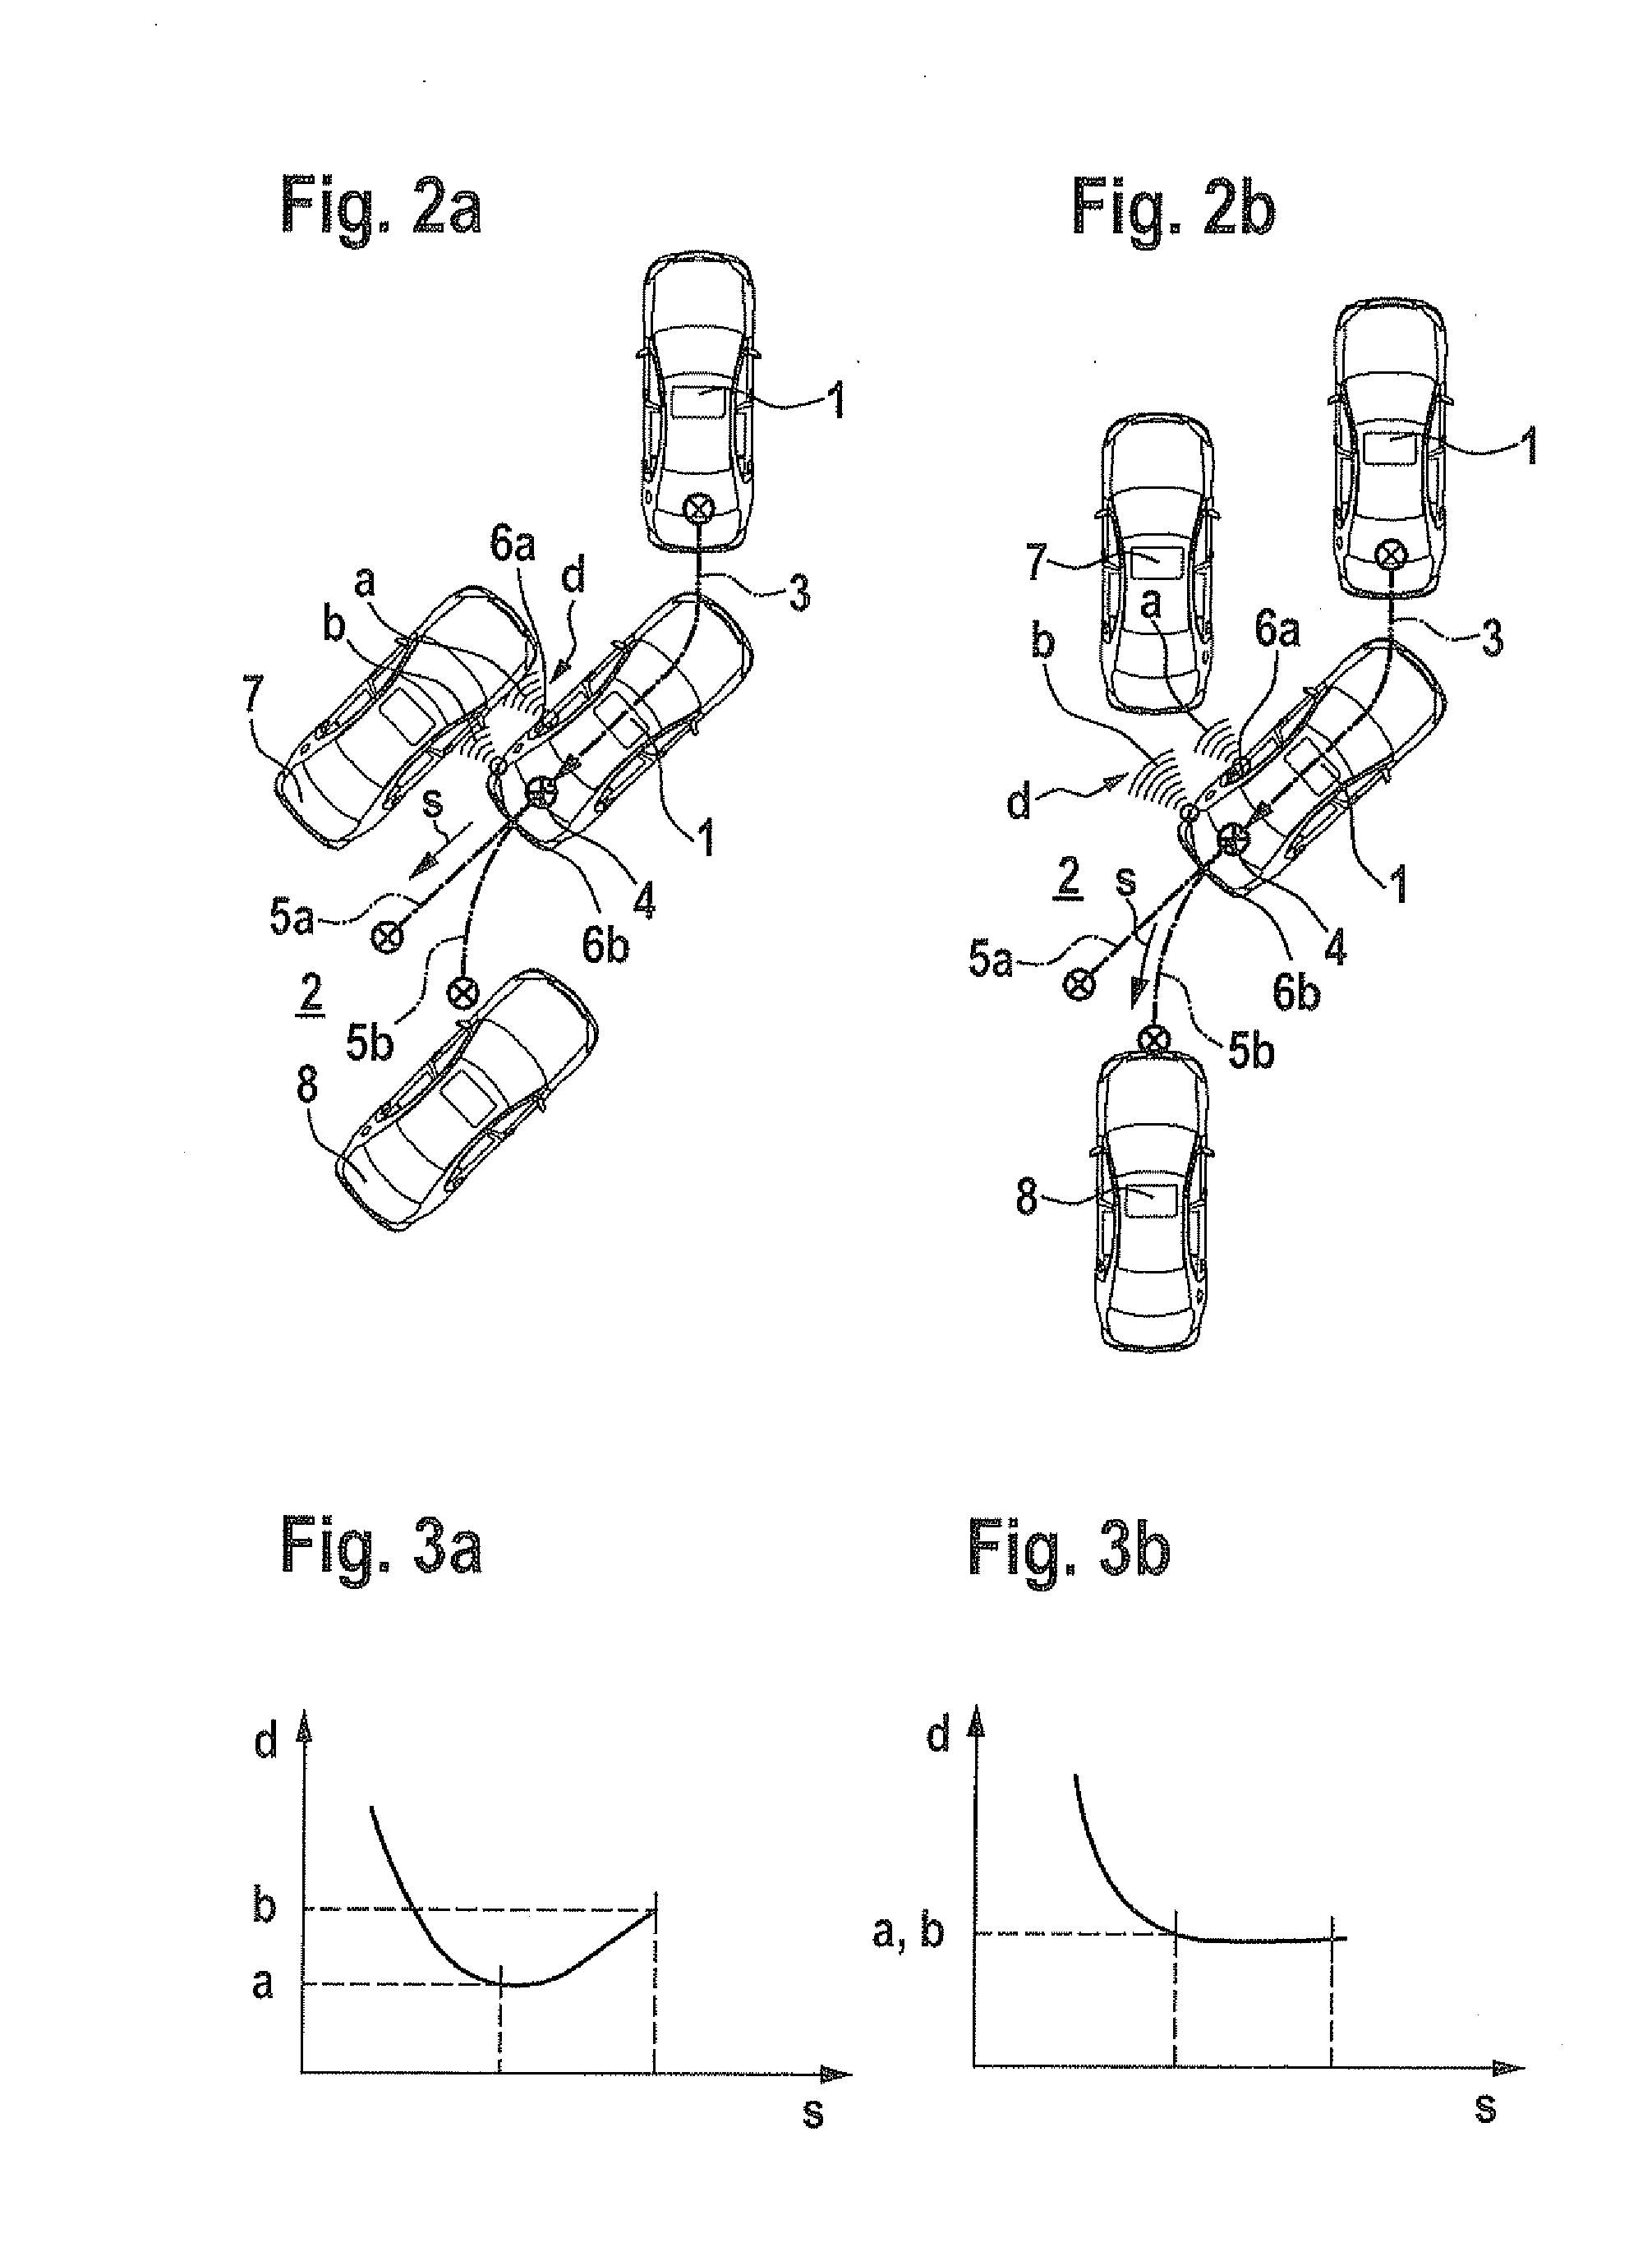 Method for Assisted Parking in a Parking Space, and Device for that Purpose